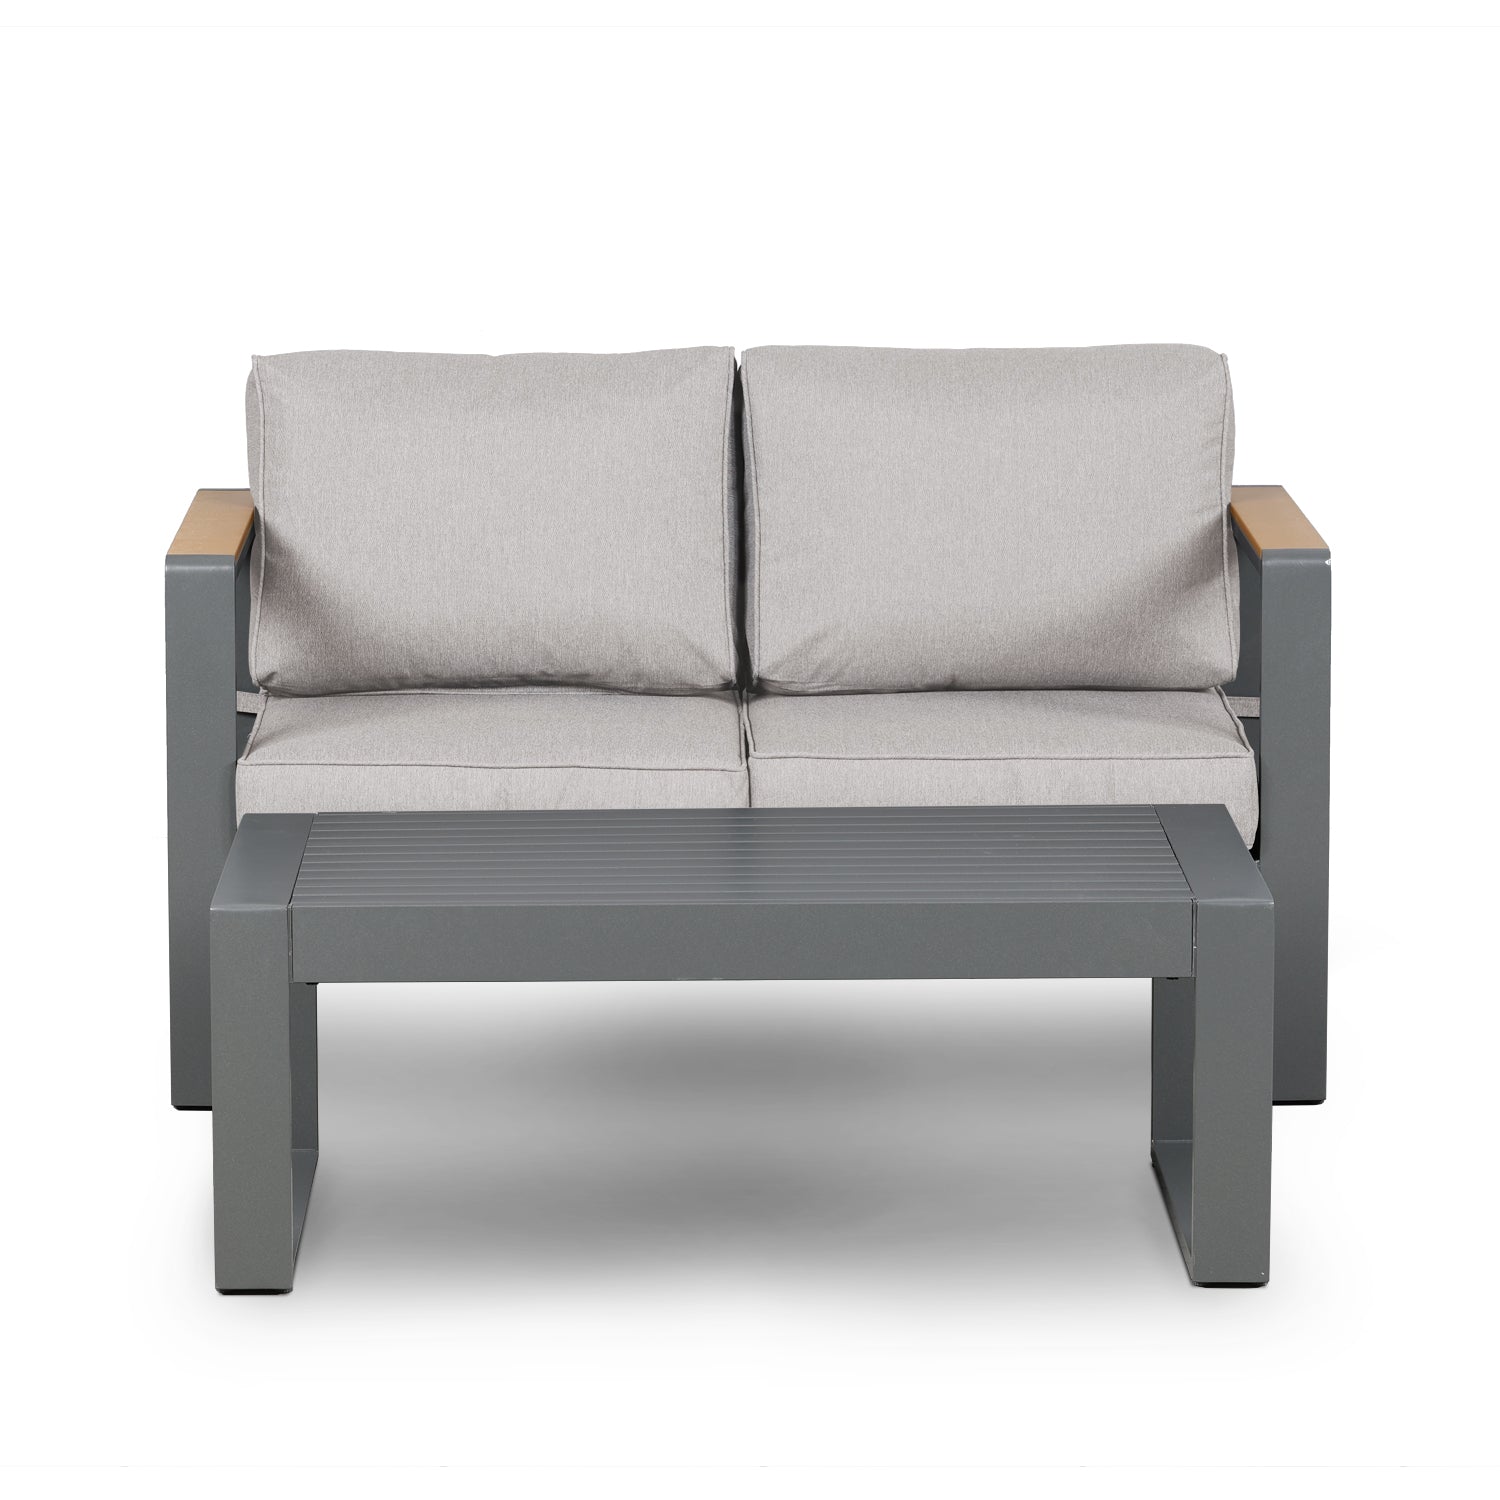 Outdoor Loveseat Sofa with Coffee Table Furniture Aoodor LLC Light Grey  